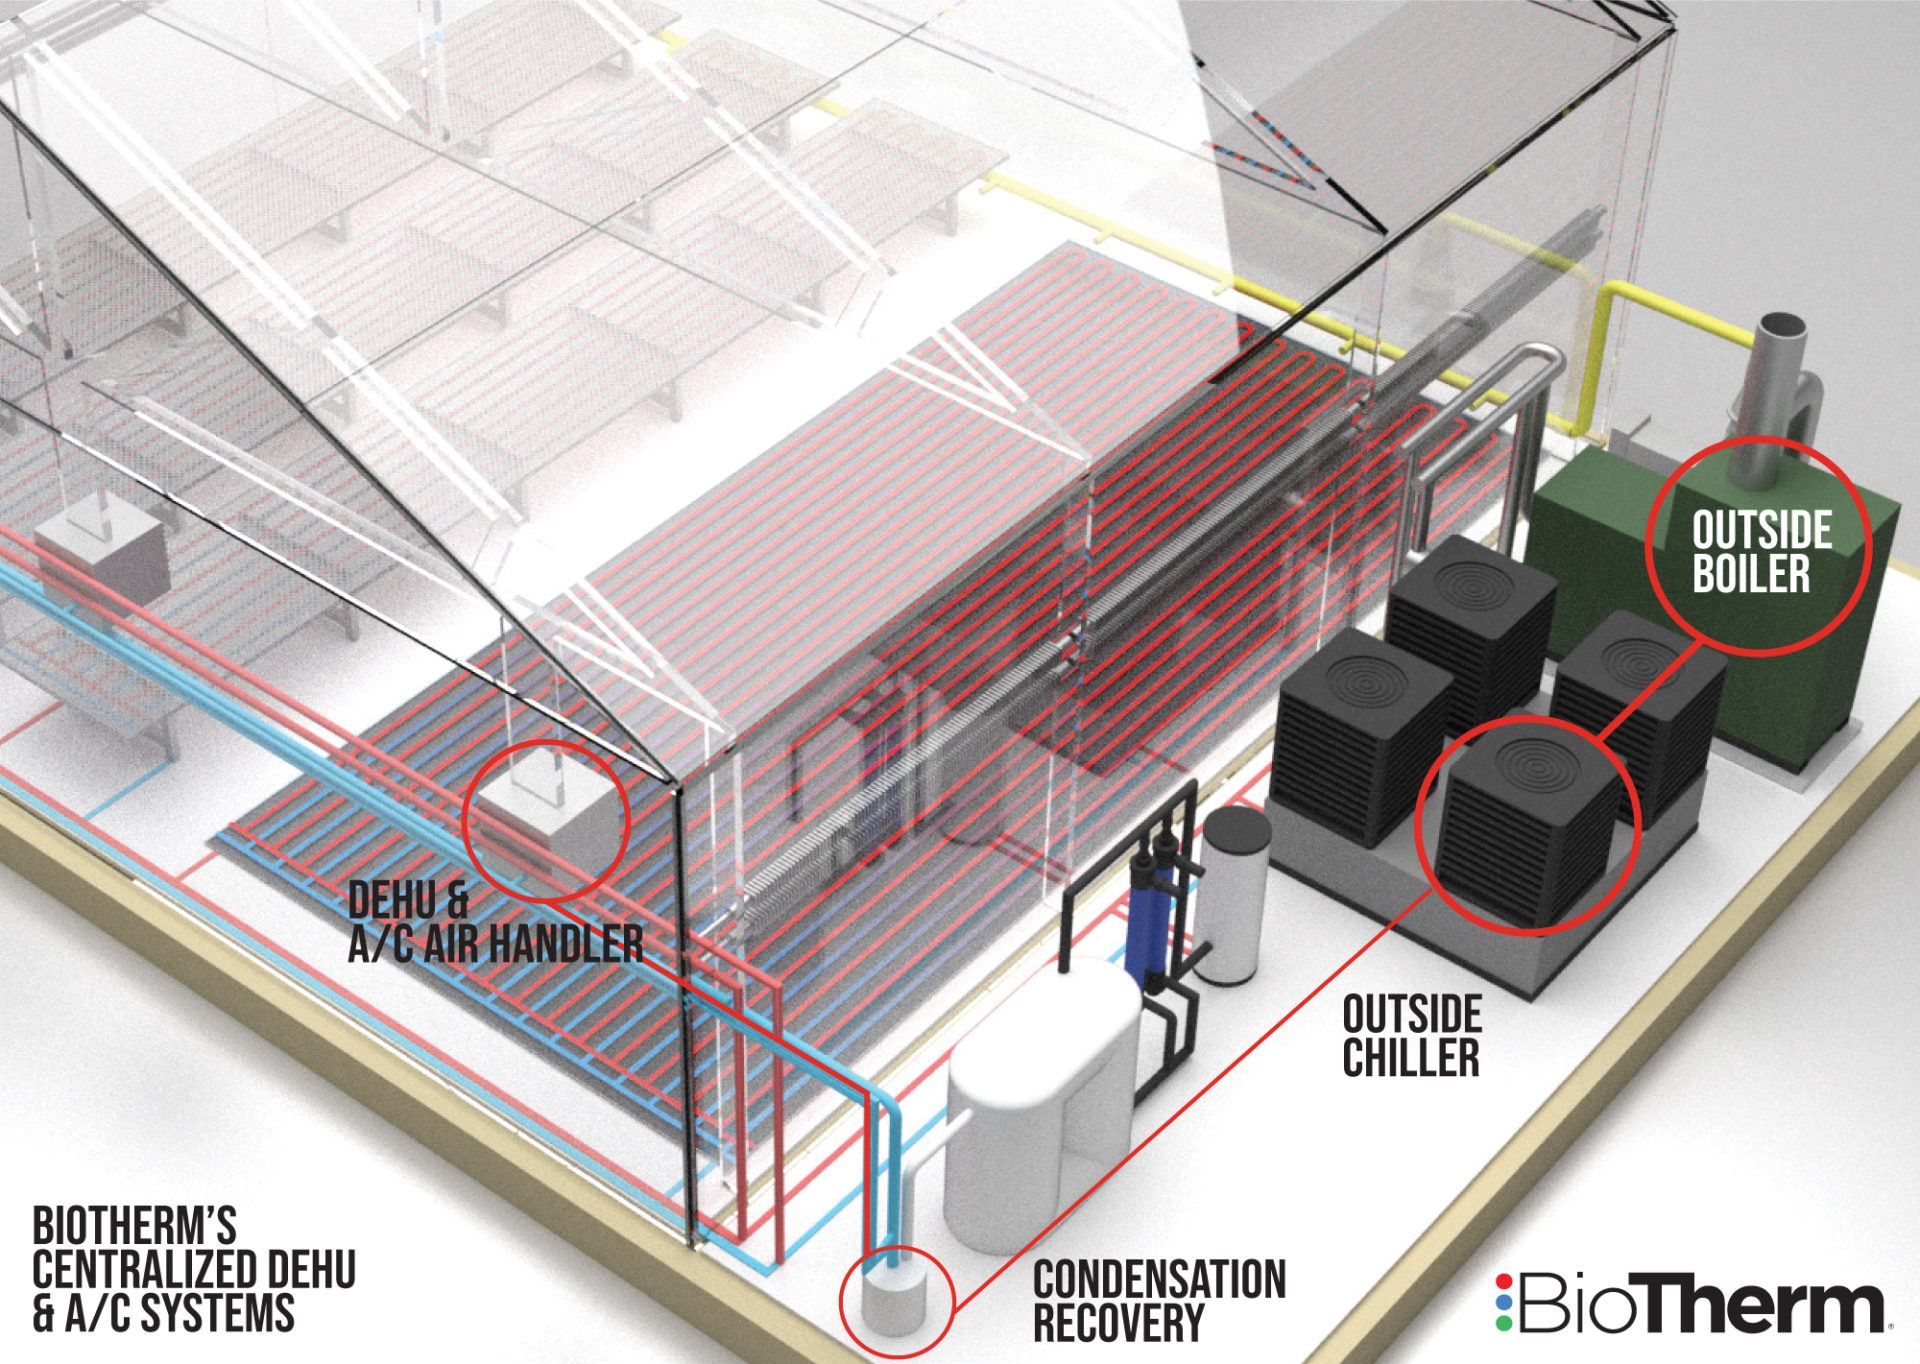 BioTherm's Centralized Dehu and A/C Systems